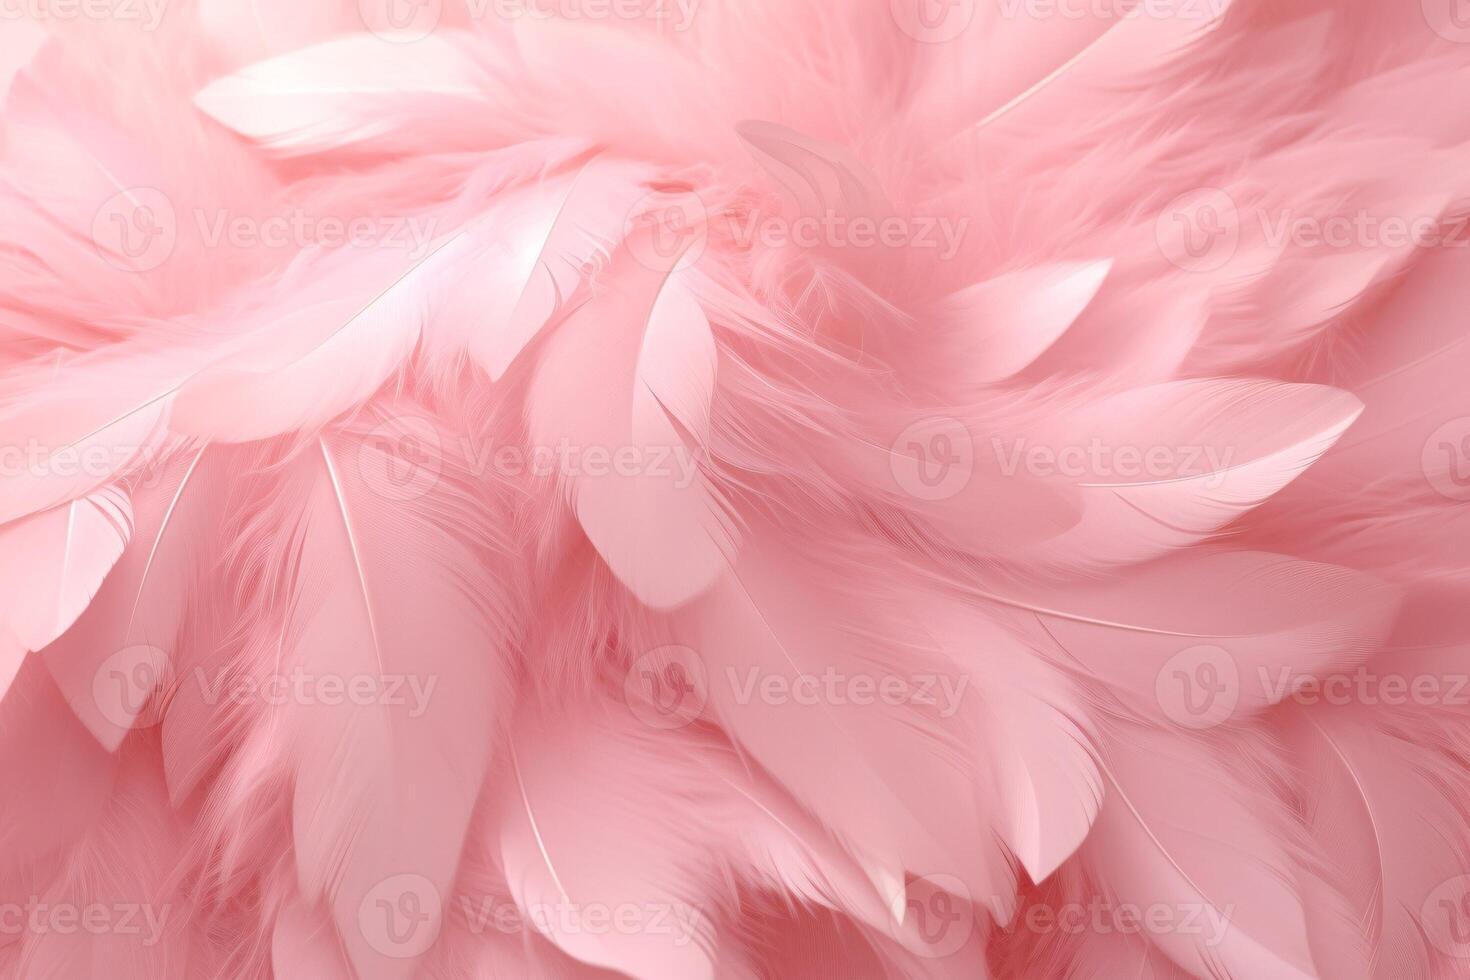 Beautiful feather pattern wallpaper, dreamy feather abstract background, pink feathers wallpaper, light pink bird feathers pattern, photo